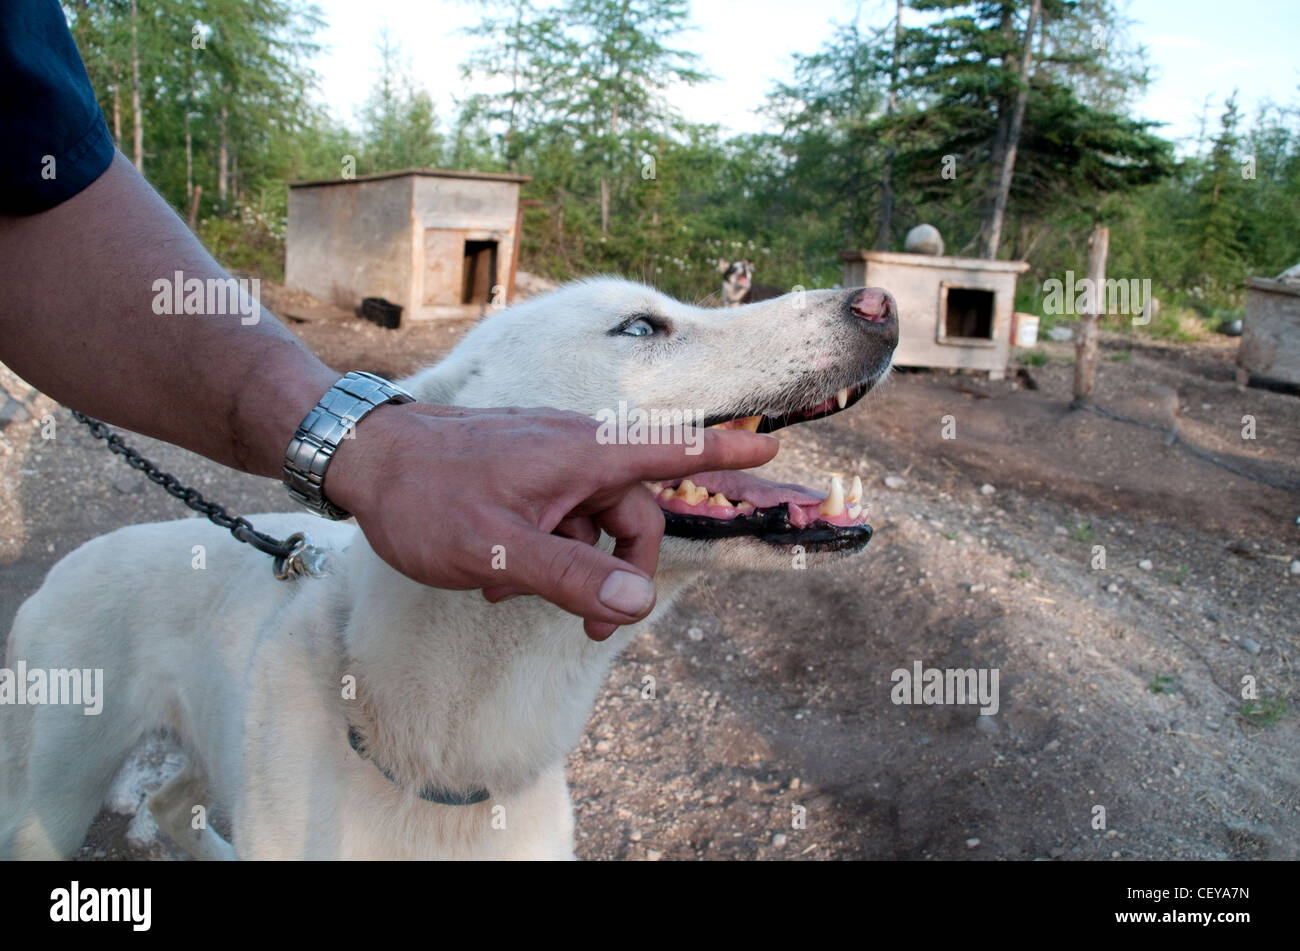 A dog sled musher and trainer shows off the teeth of one of his dogs at a kennel, in summer, near the Hudson Bay town of Churchill, Manitoba, Canada. Stock Photo